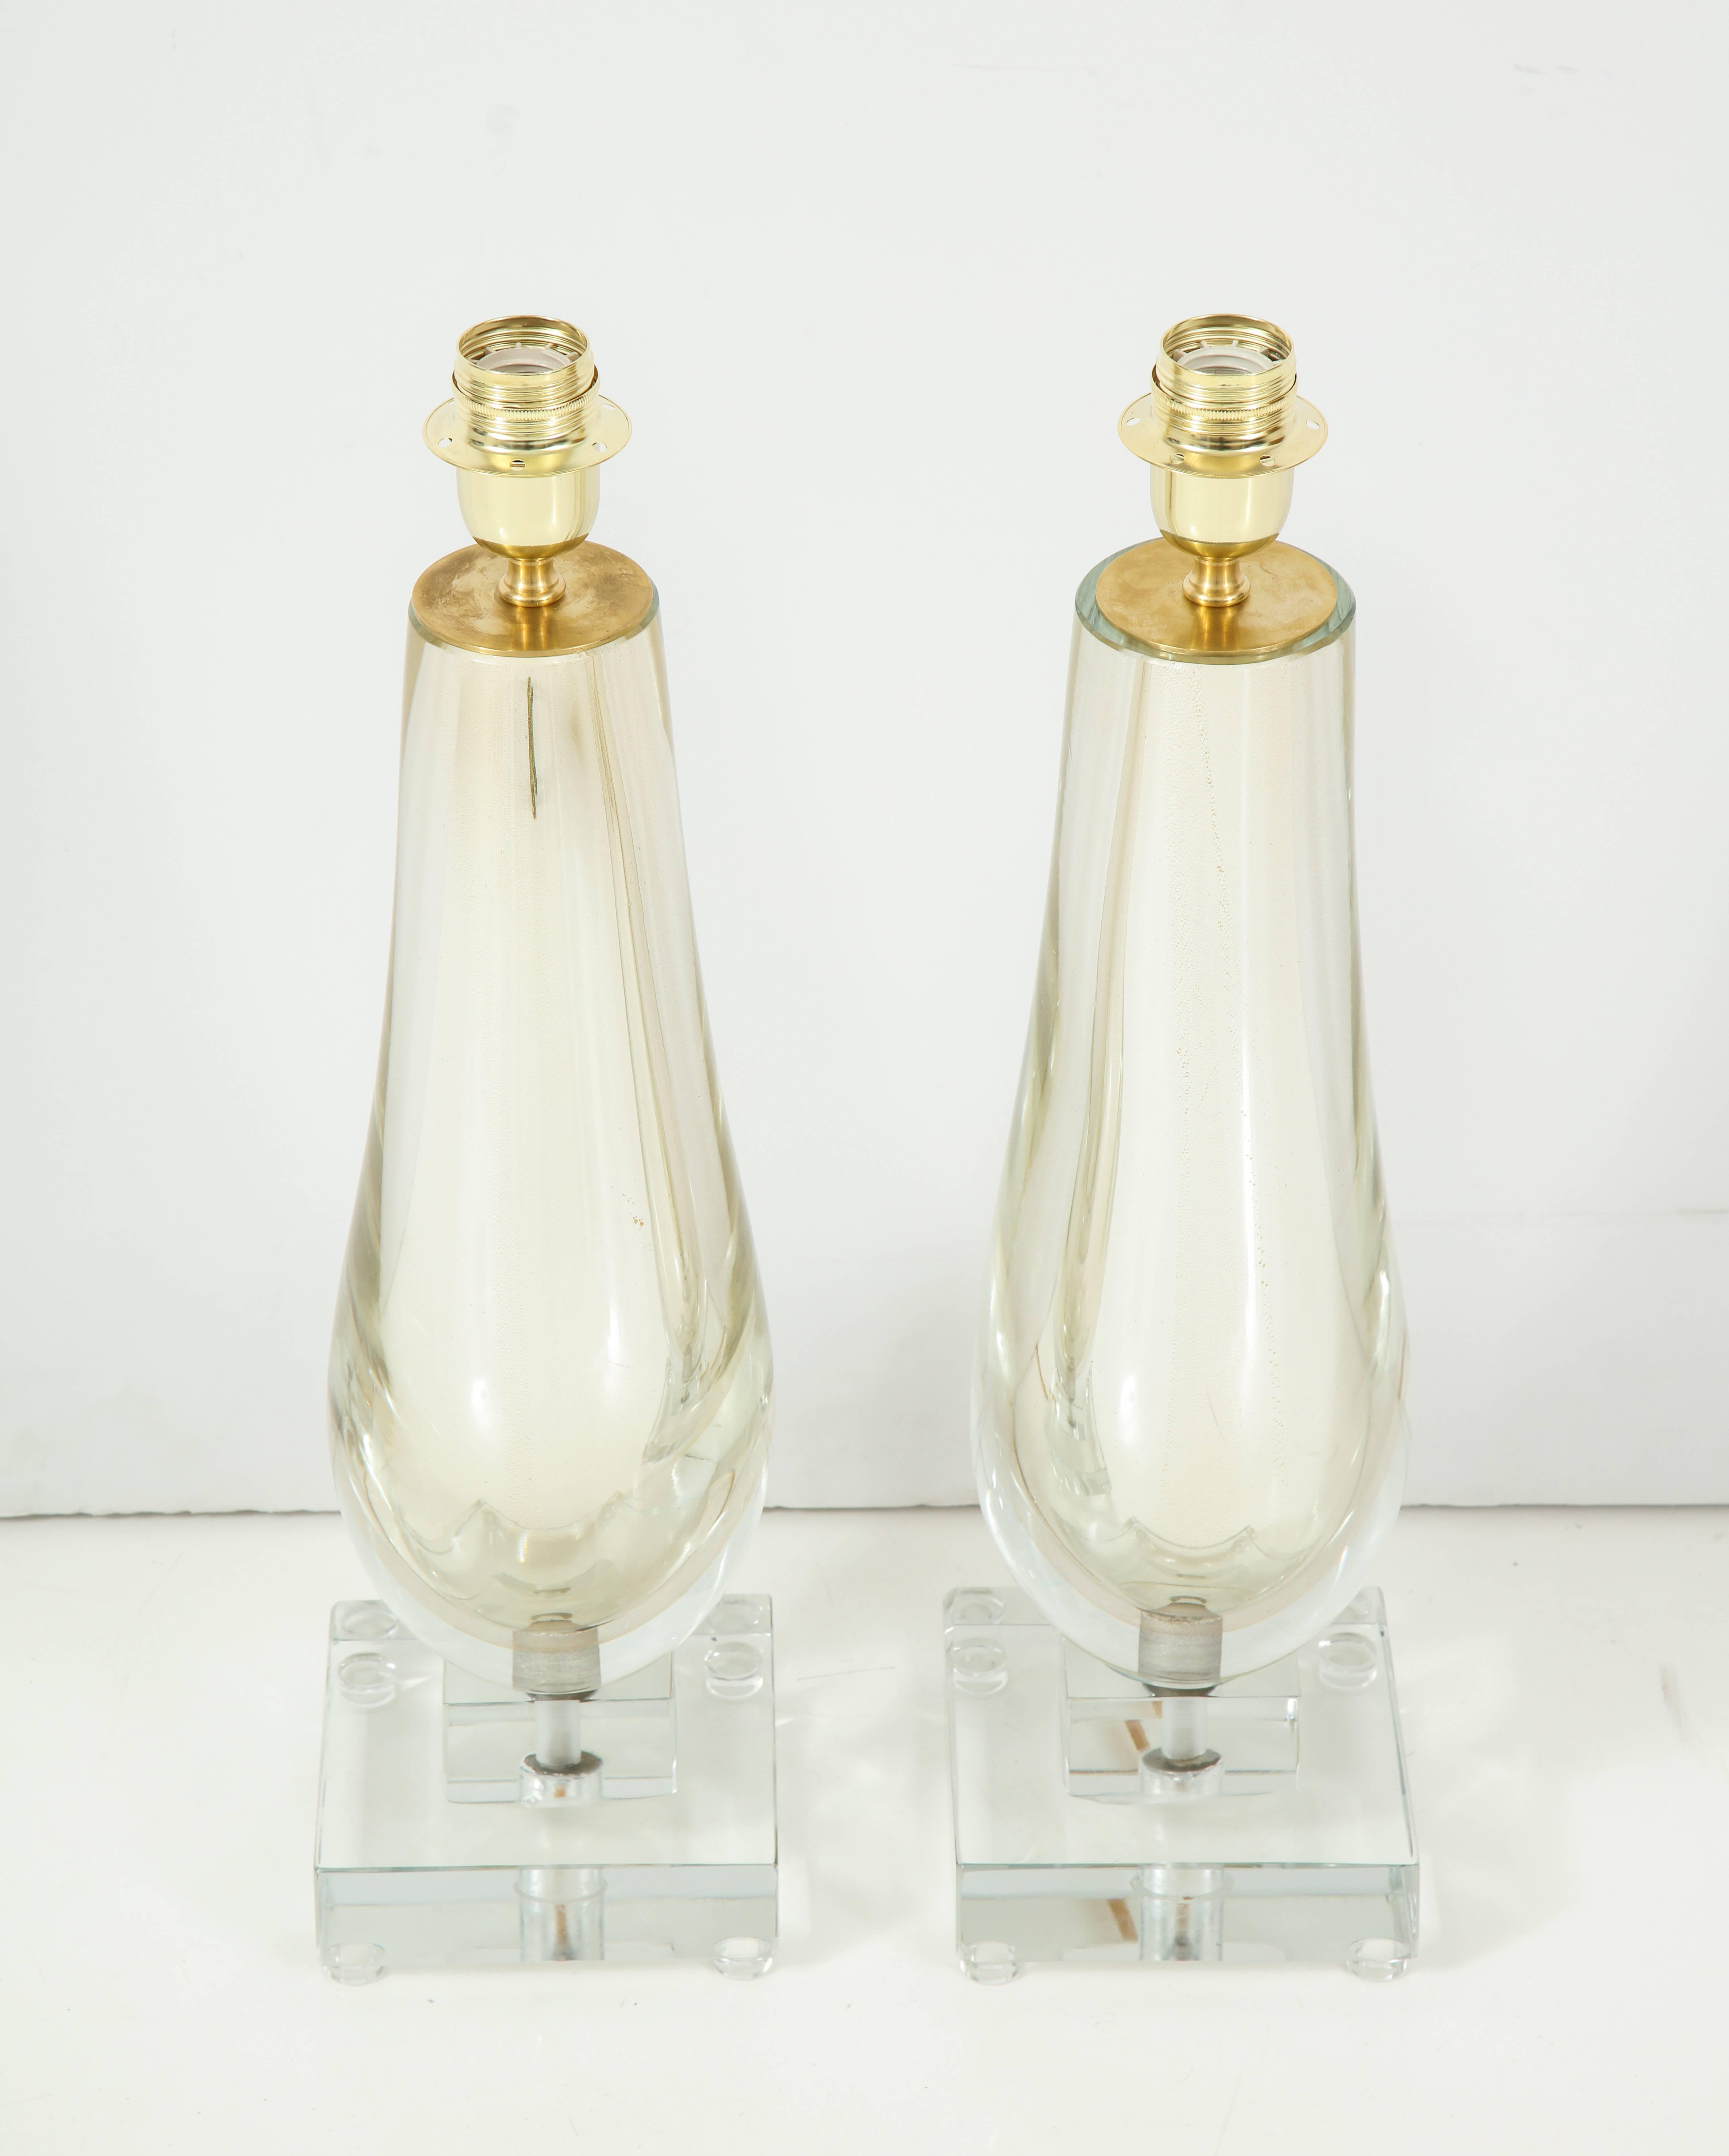 This pair of clear and gold mirrored Murano glass lamps is absolutely stunning! Comprised of hand blown clear glass layered over shimmering gold mercury glass to create a mirrored effect. The jeweled base sits atop two solid Murano clear glass